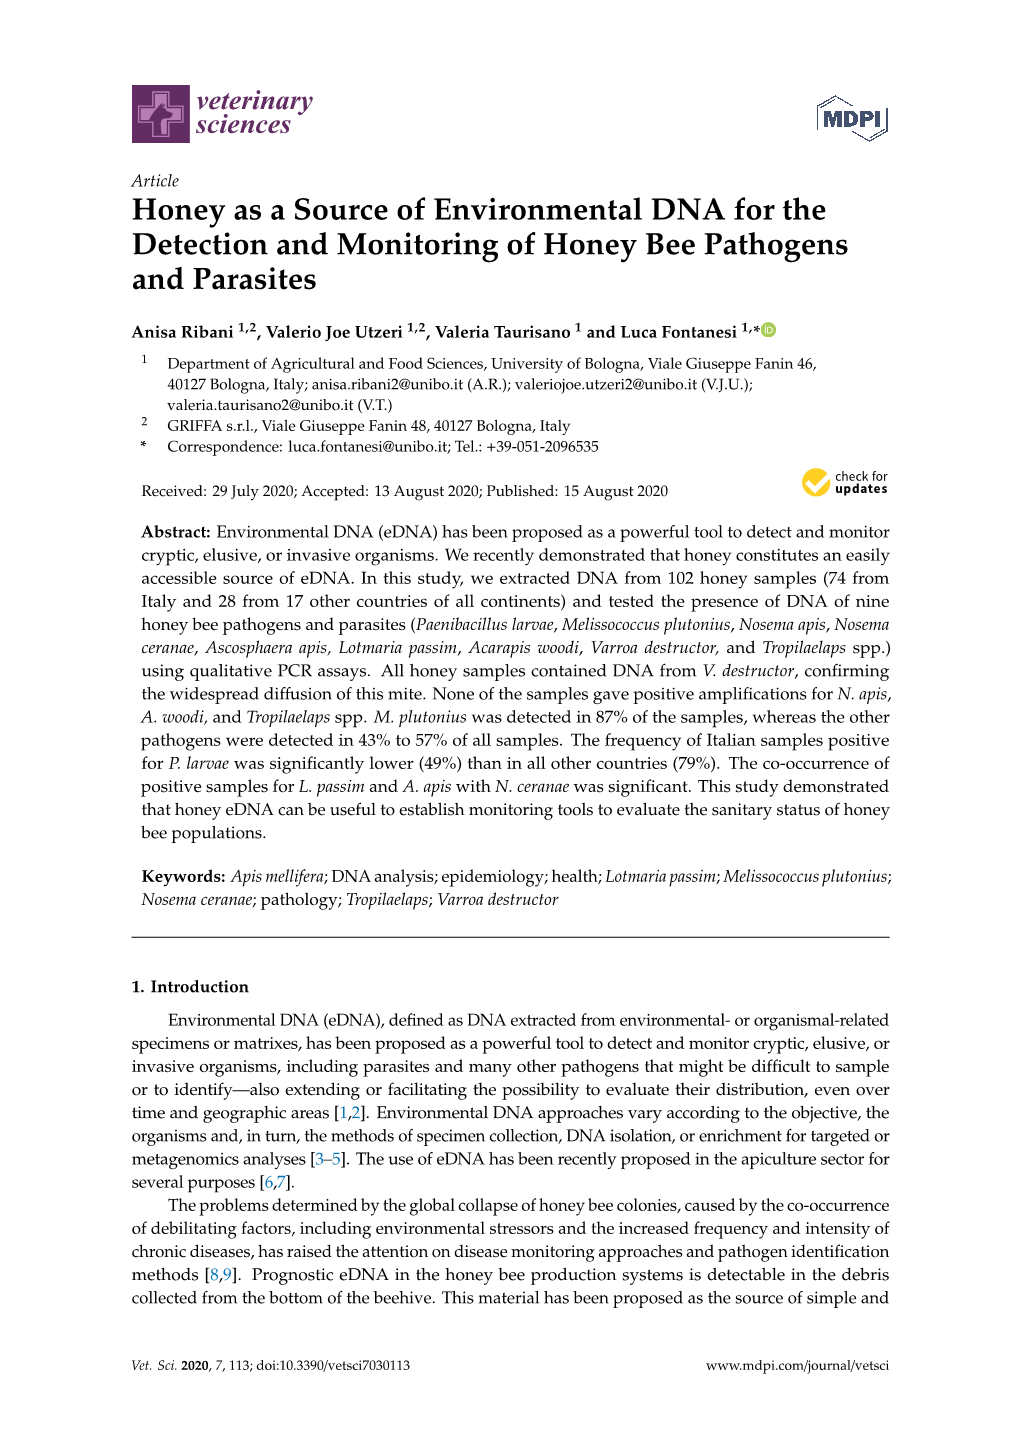 Honey As a Source of Environmental DNA for the Detection and Monitoring of Honey Bee Pathogens and Parasites